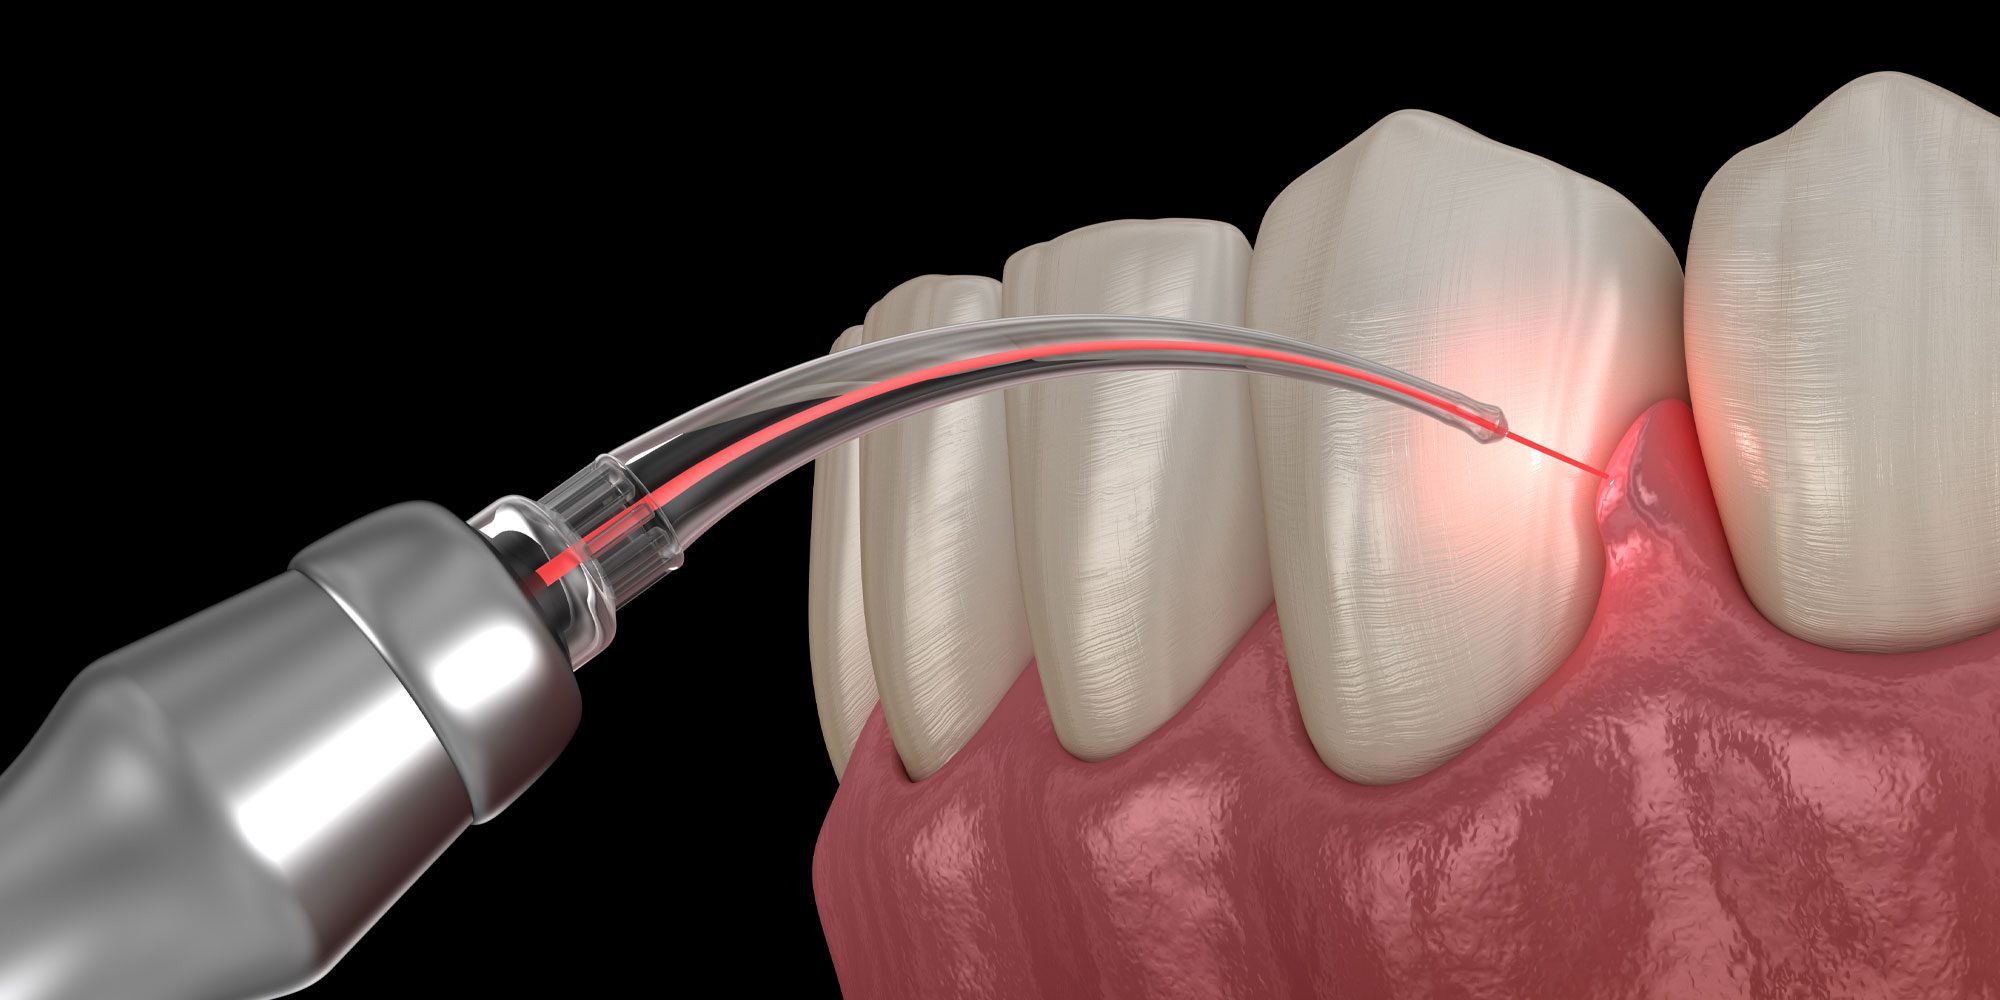 LANAP Dental Laser In Use For Clearing Gum Disease From A Patient's Gumline